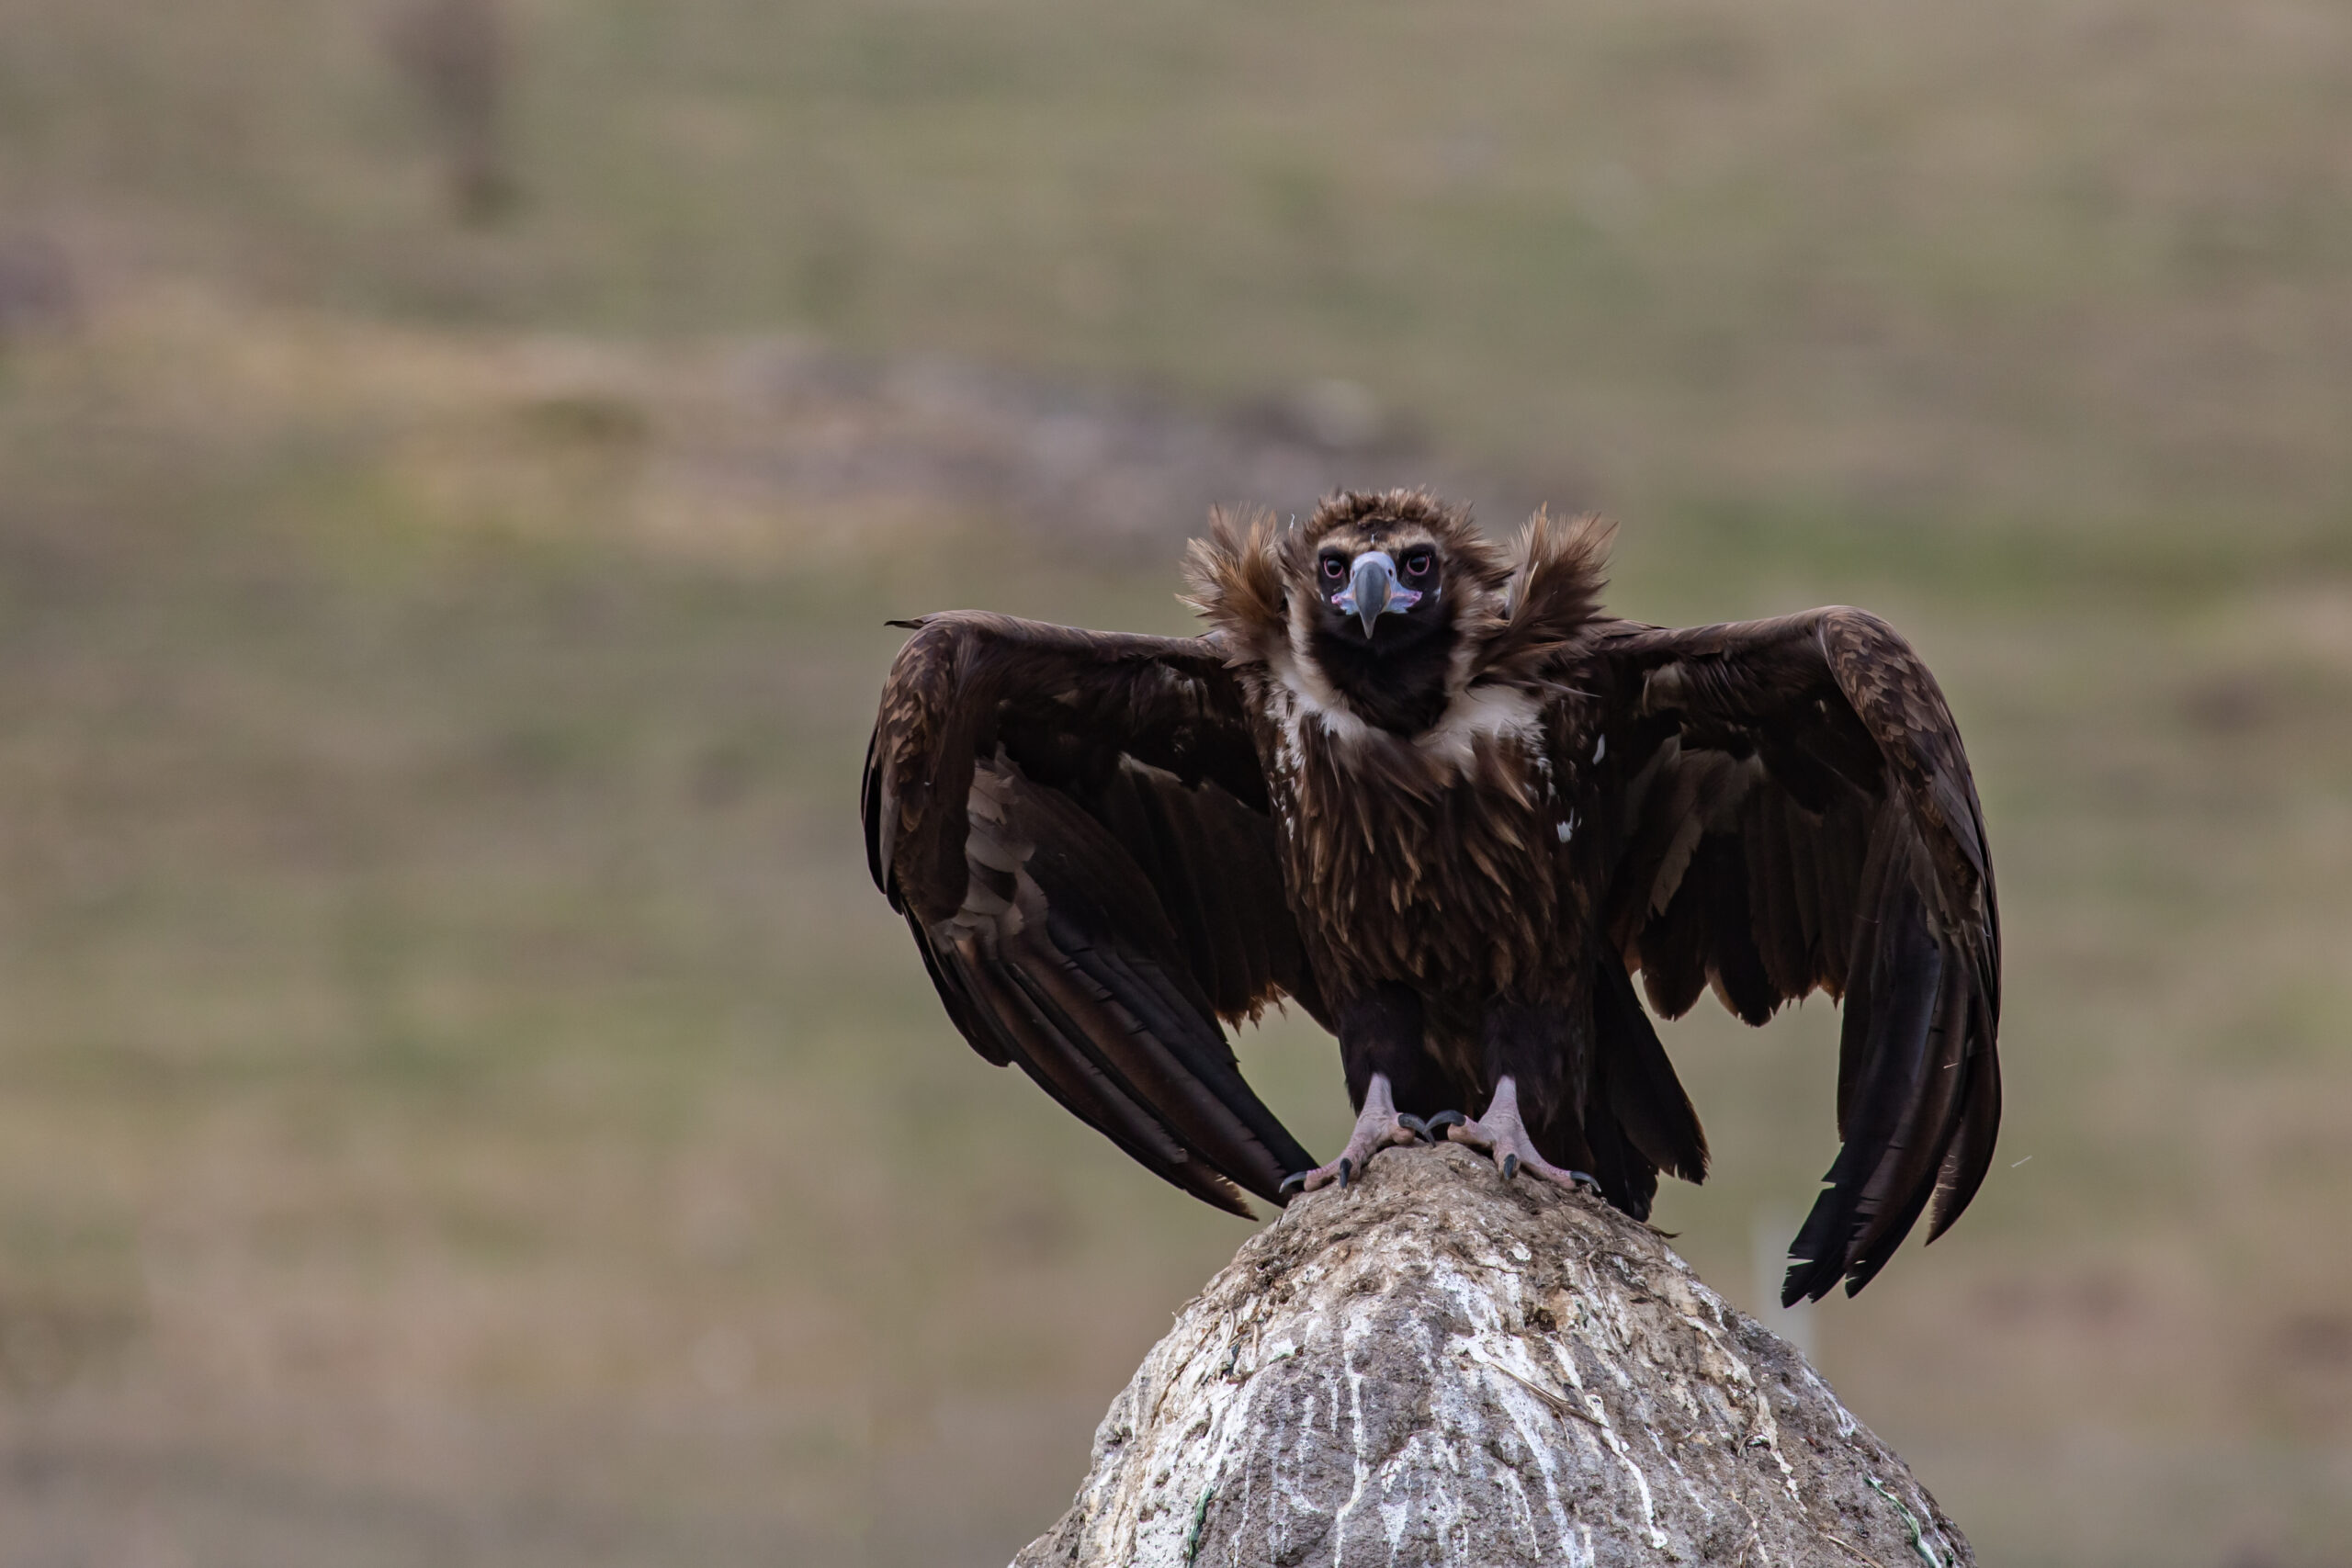 Vultures mostly forage outside protected areas; conservation